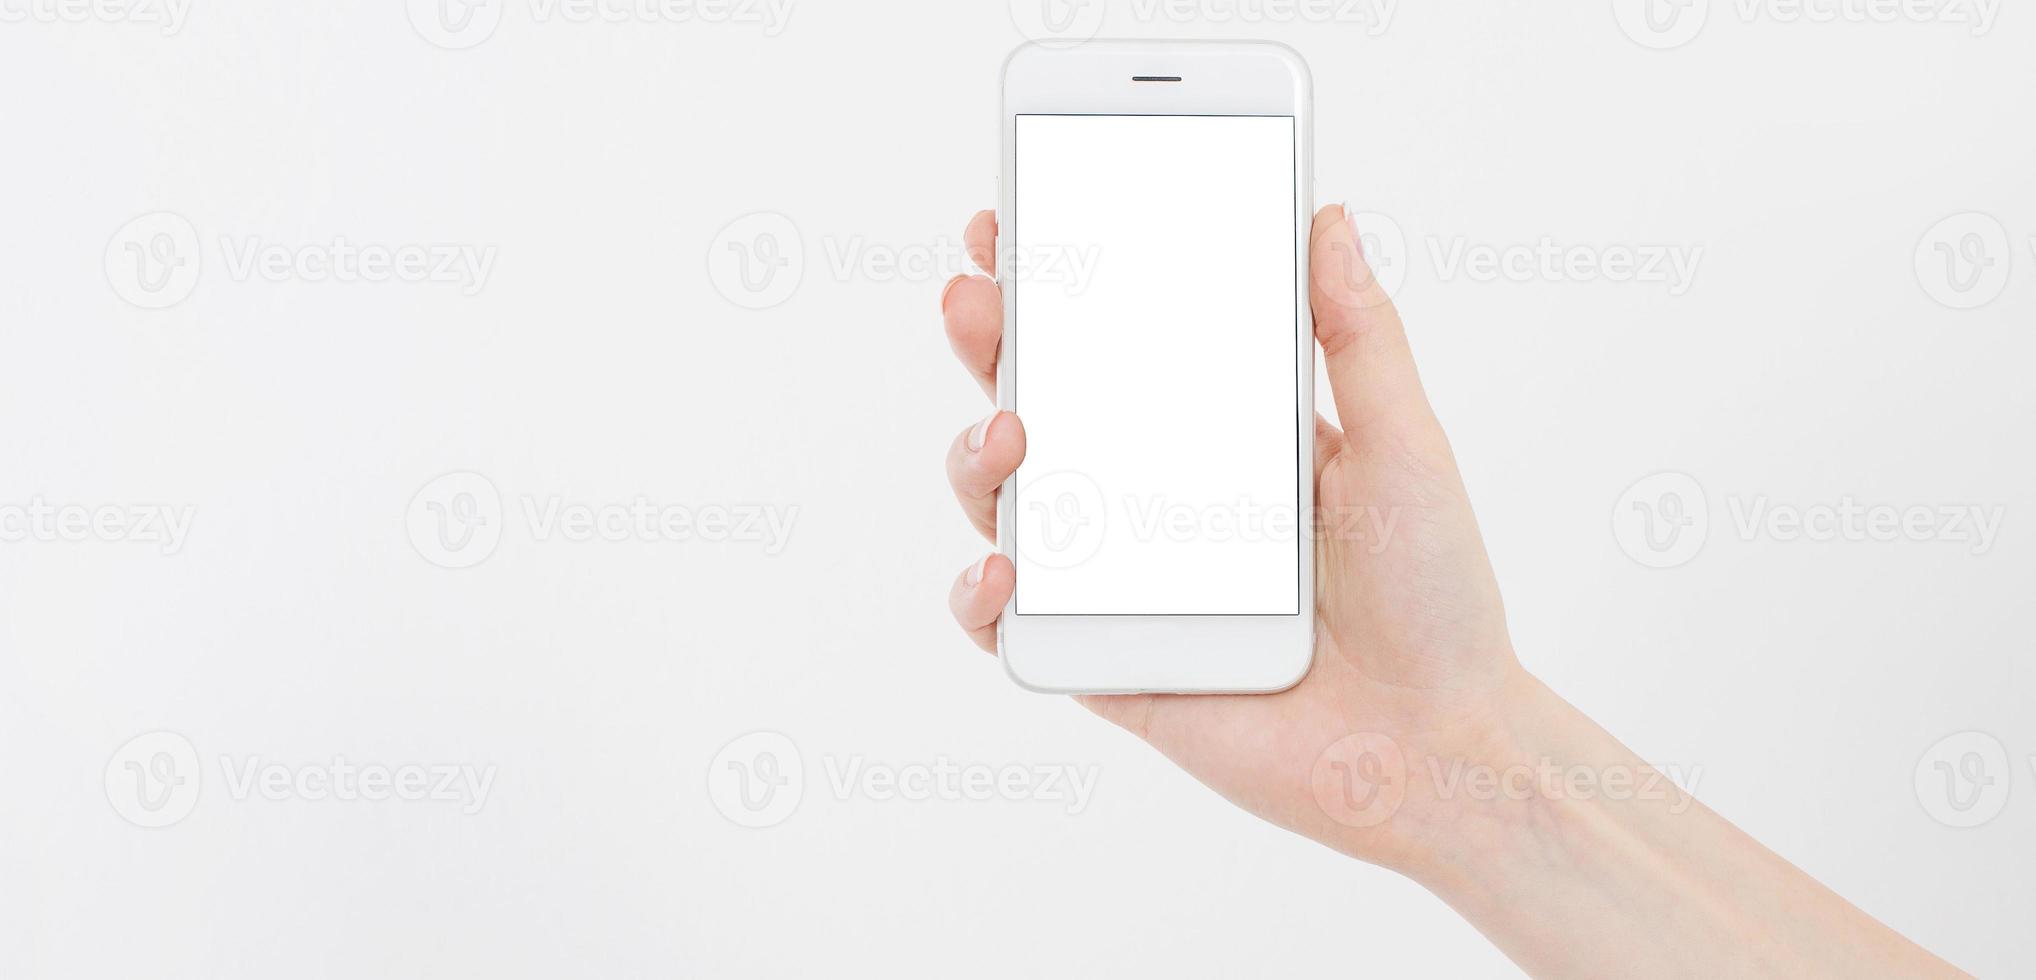 female hand hold mobile phone isolated on white, woman holding phone with empty display,blank screen,touching photo